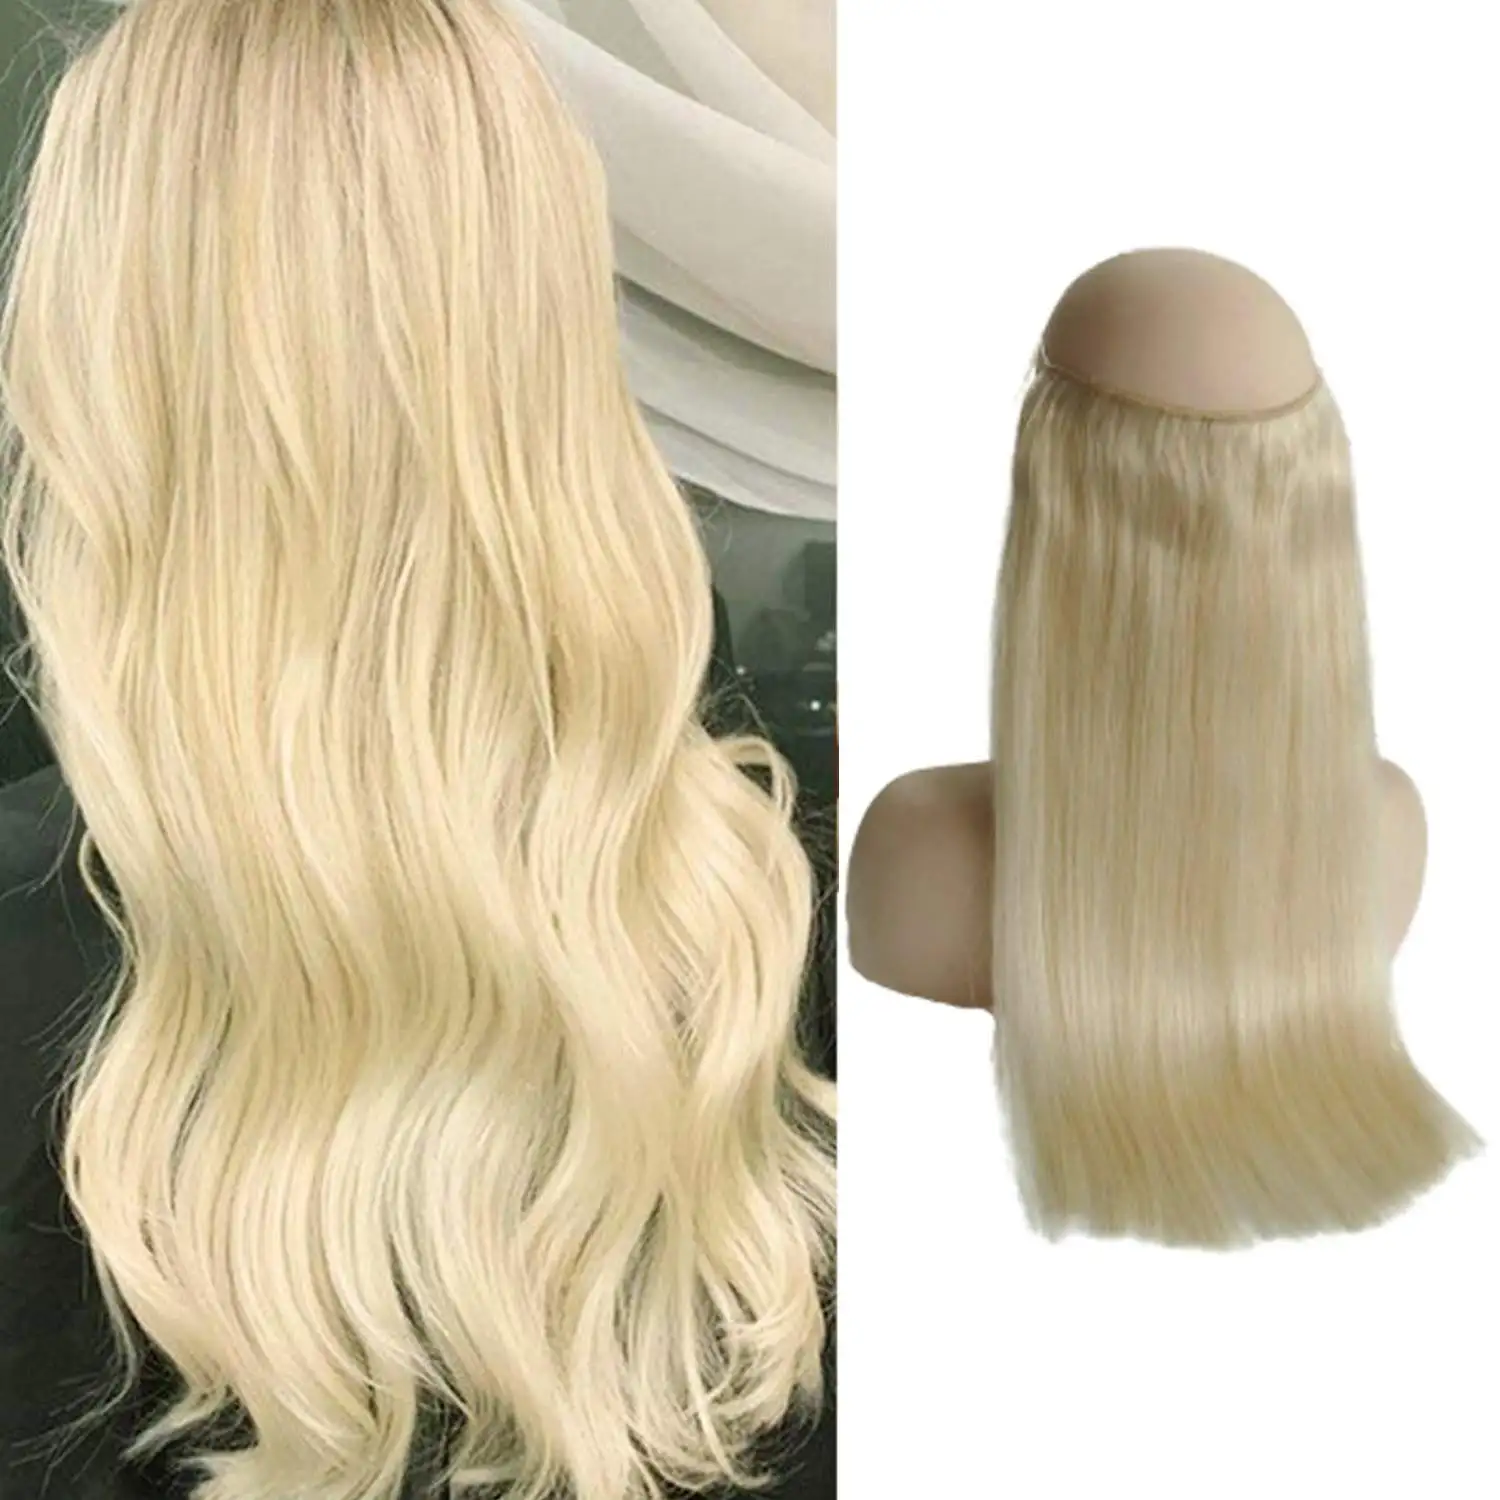 100% Indian Human hair extensions halo hair weaves with instant length and volume options